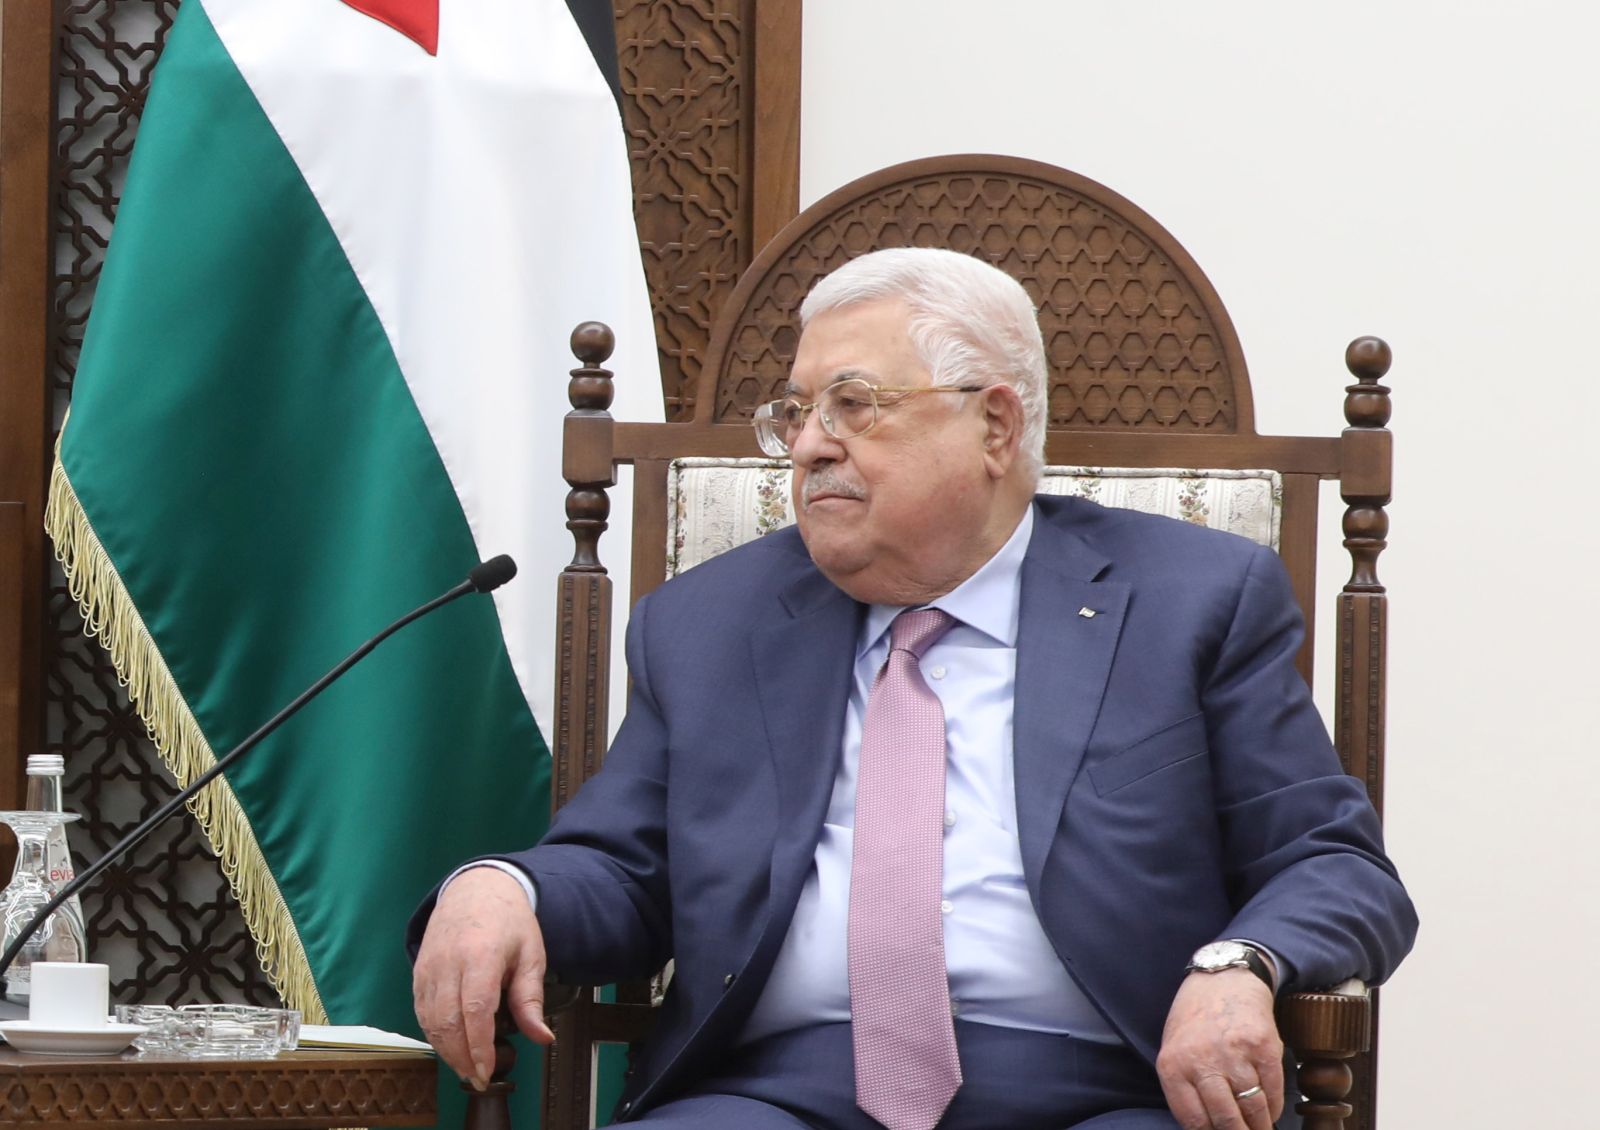 epa09853260 Palestinian President Mahmoud Abbas (R) and US Secretary of State Antony Blinken (L) during their meeting in the West Bank City of Ramallah, 27 March 2022. Blinken began a Mideast tour where he will have talks with Israeli Prime Minister Naftali Bennett and other senior Israeli officials, Palestinian President Mahmoud Abbas, and take part in a summit with foreign ministers of Israel, UAE, Egypt, Bahrain and Morocco.  EPA/ALAA BADARNEH